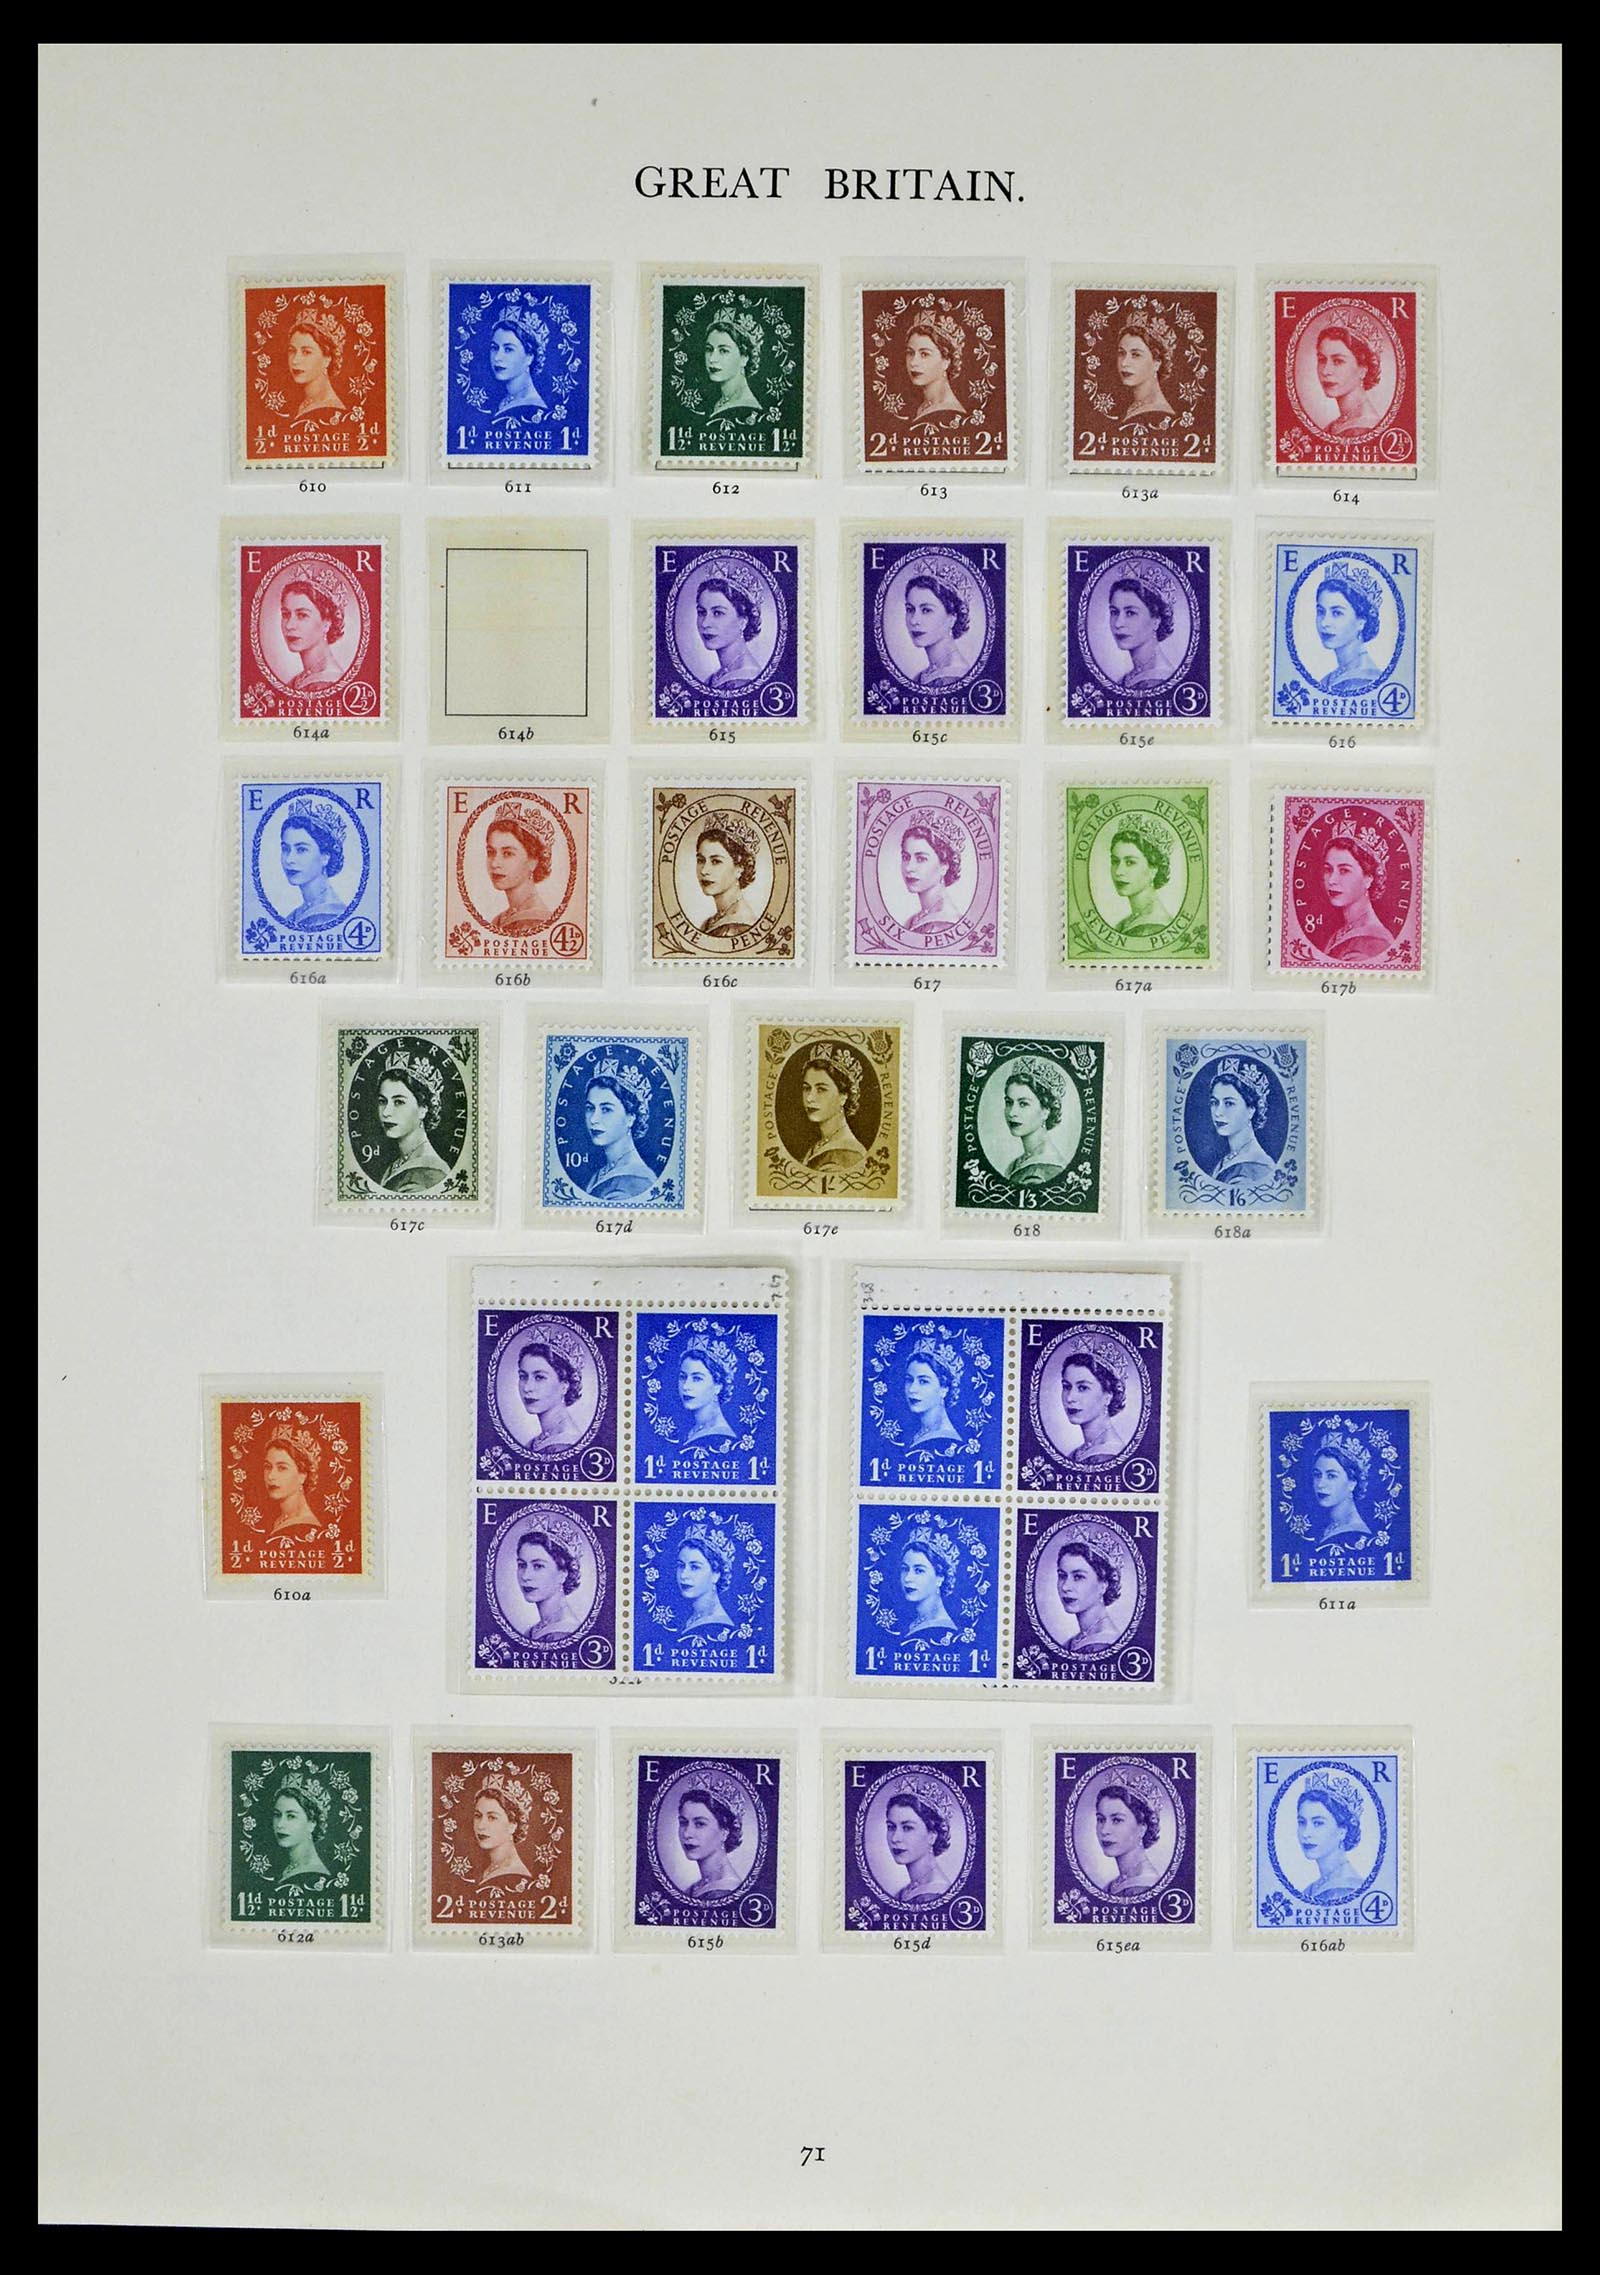 39025 0032 - Stamp collection 39025 Great Britain specialised 1840-1990.